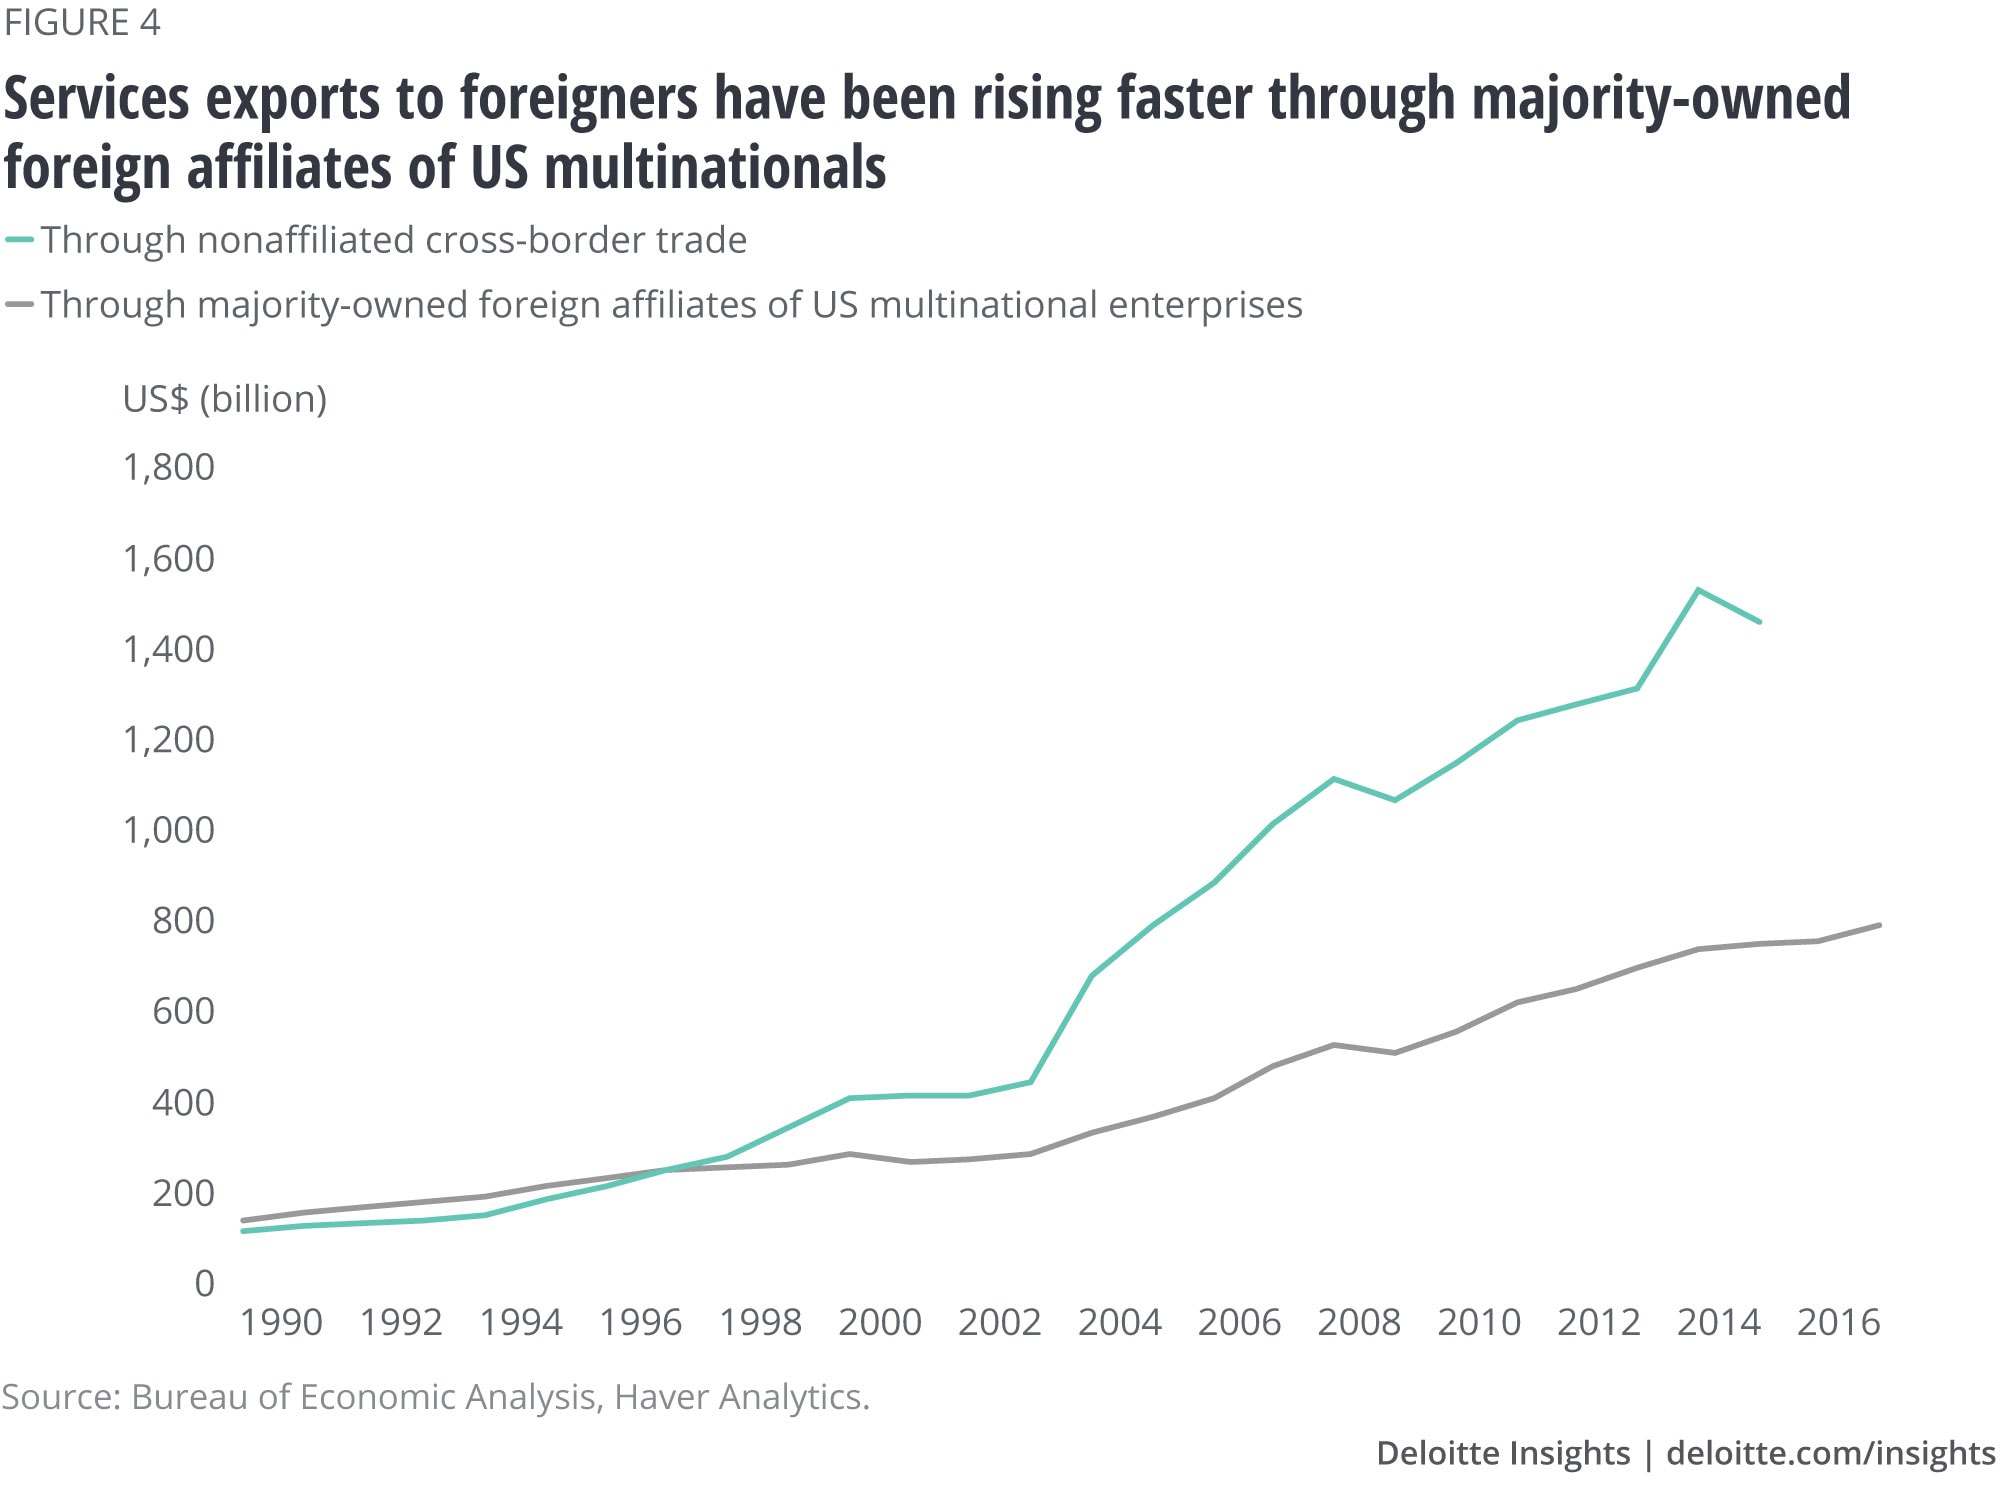 Services exports to foreigners have been rising faster through majority-owned foreign affiliates of US multinationals